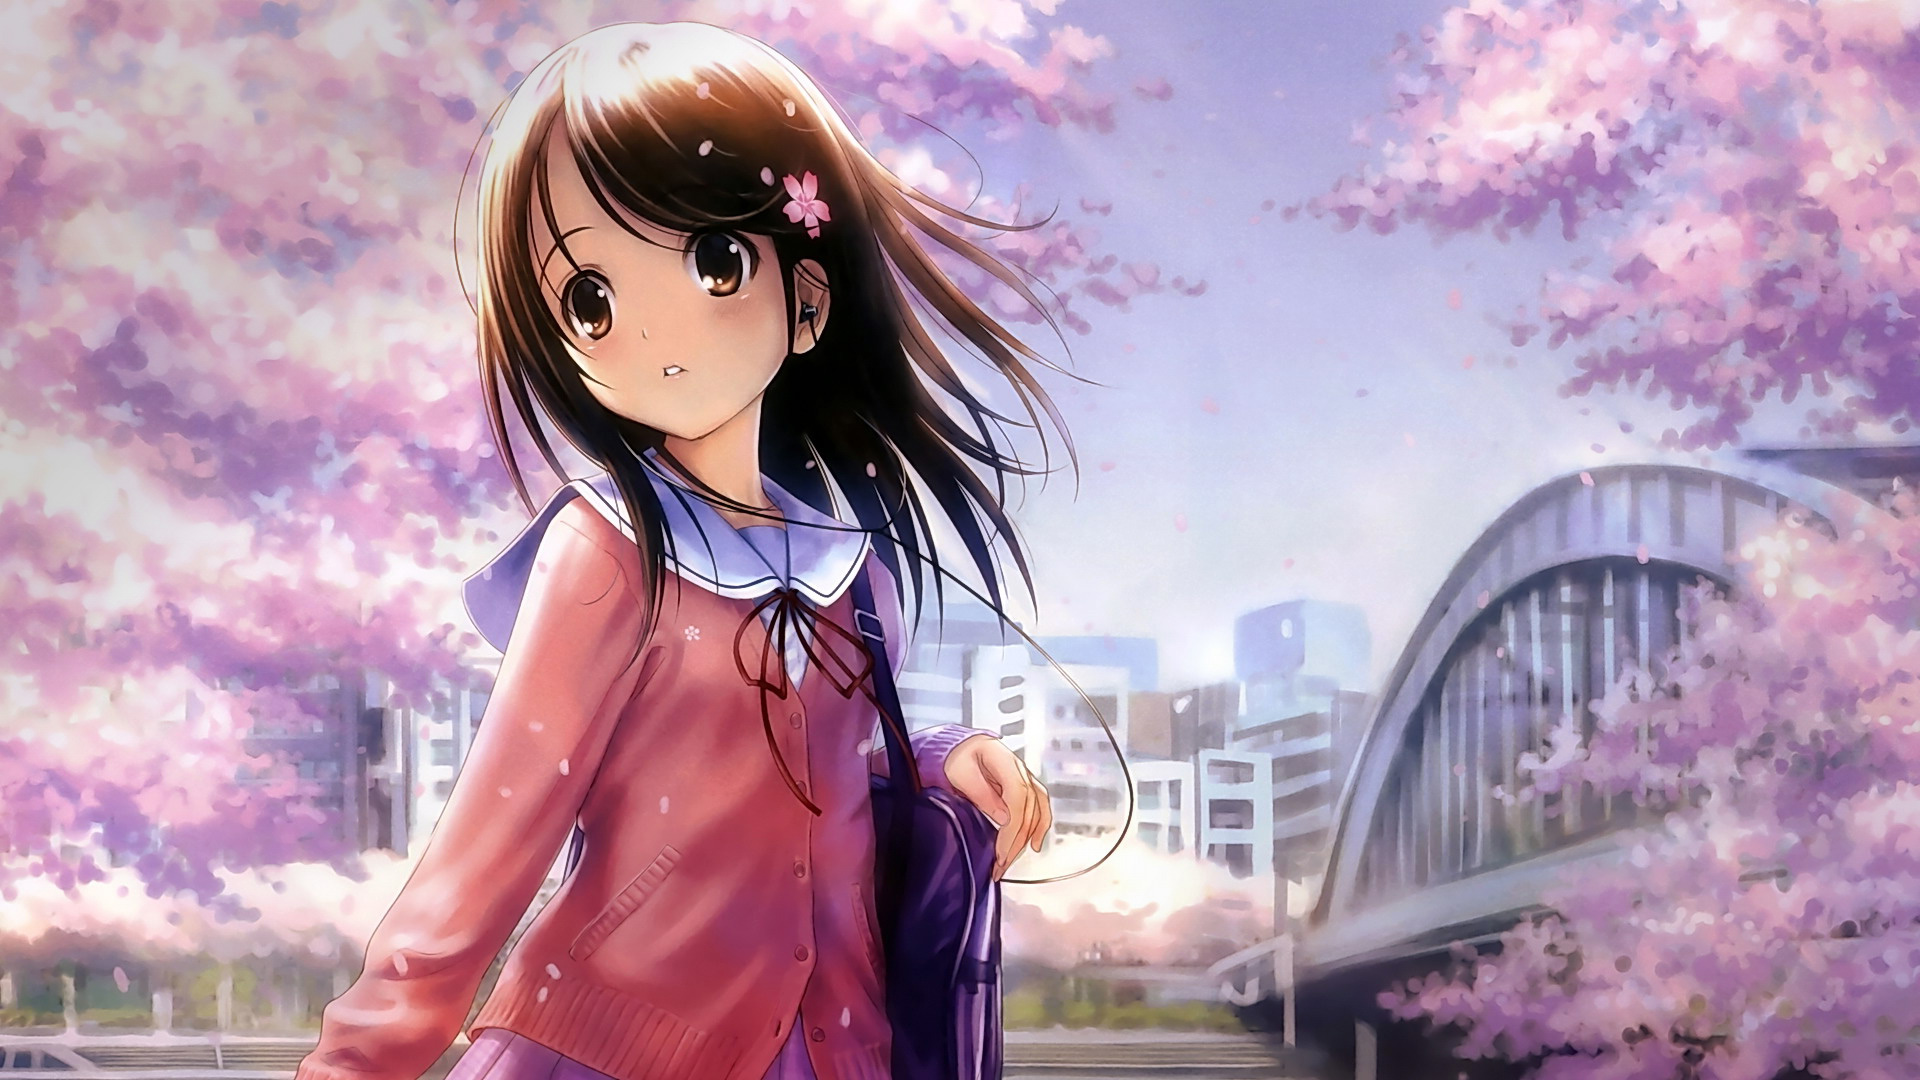 Anime Full HD Wallpapers download 1080p desktop backgrounds 1920x1080